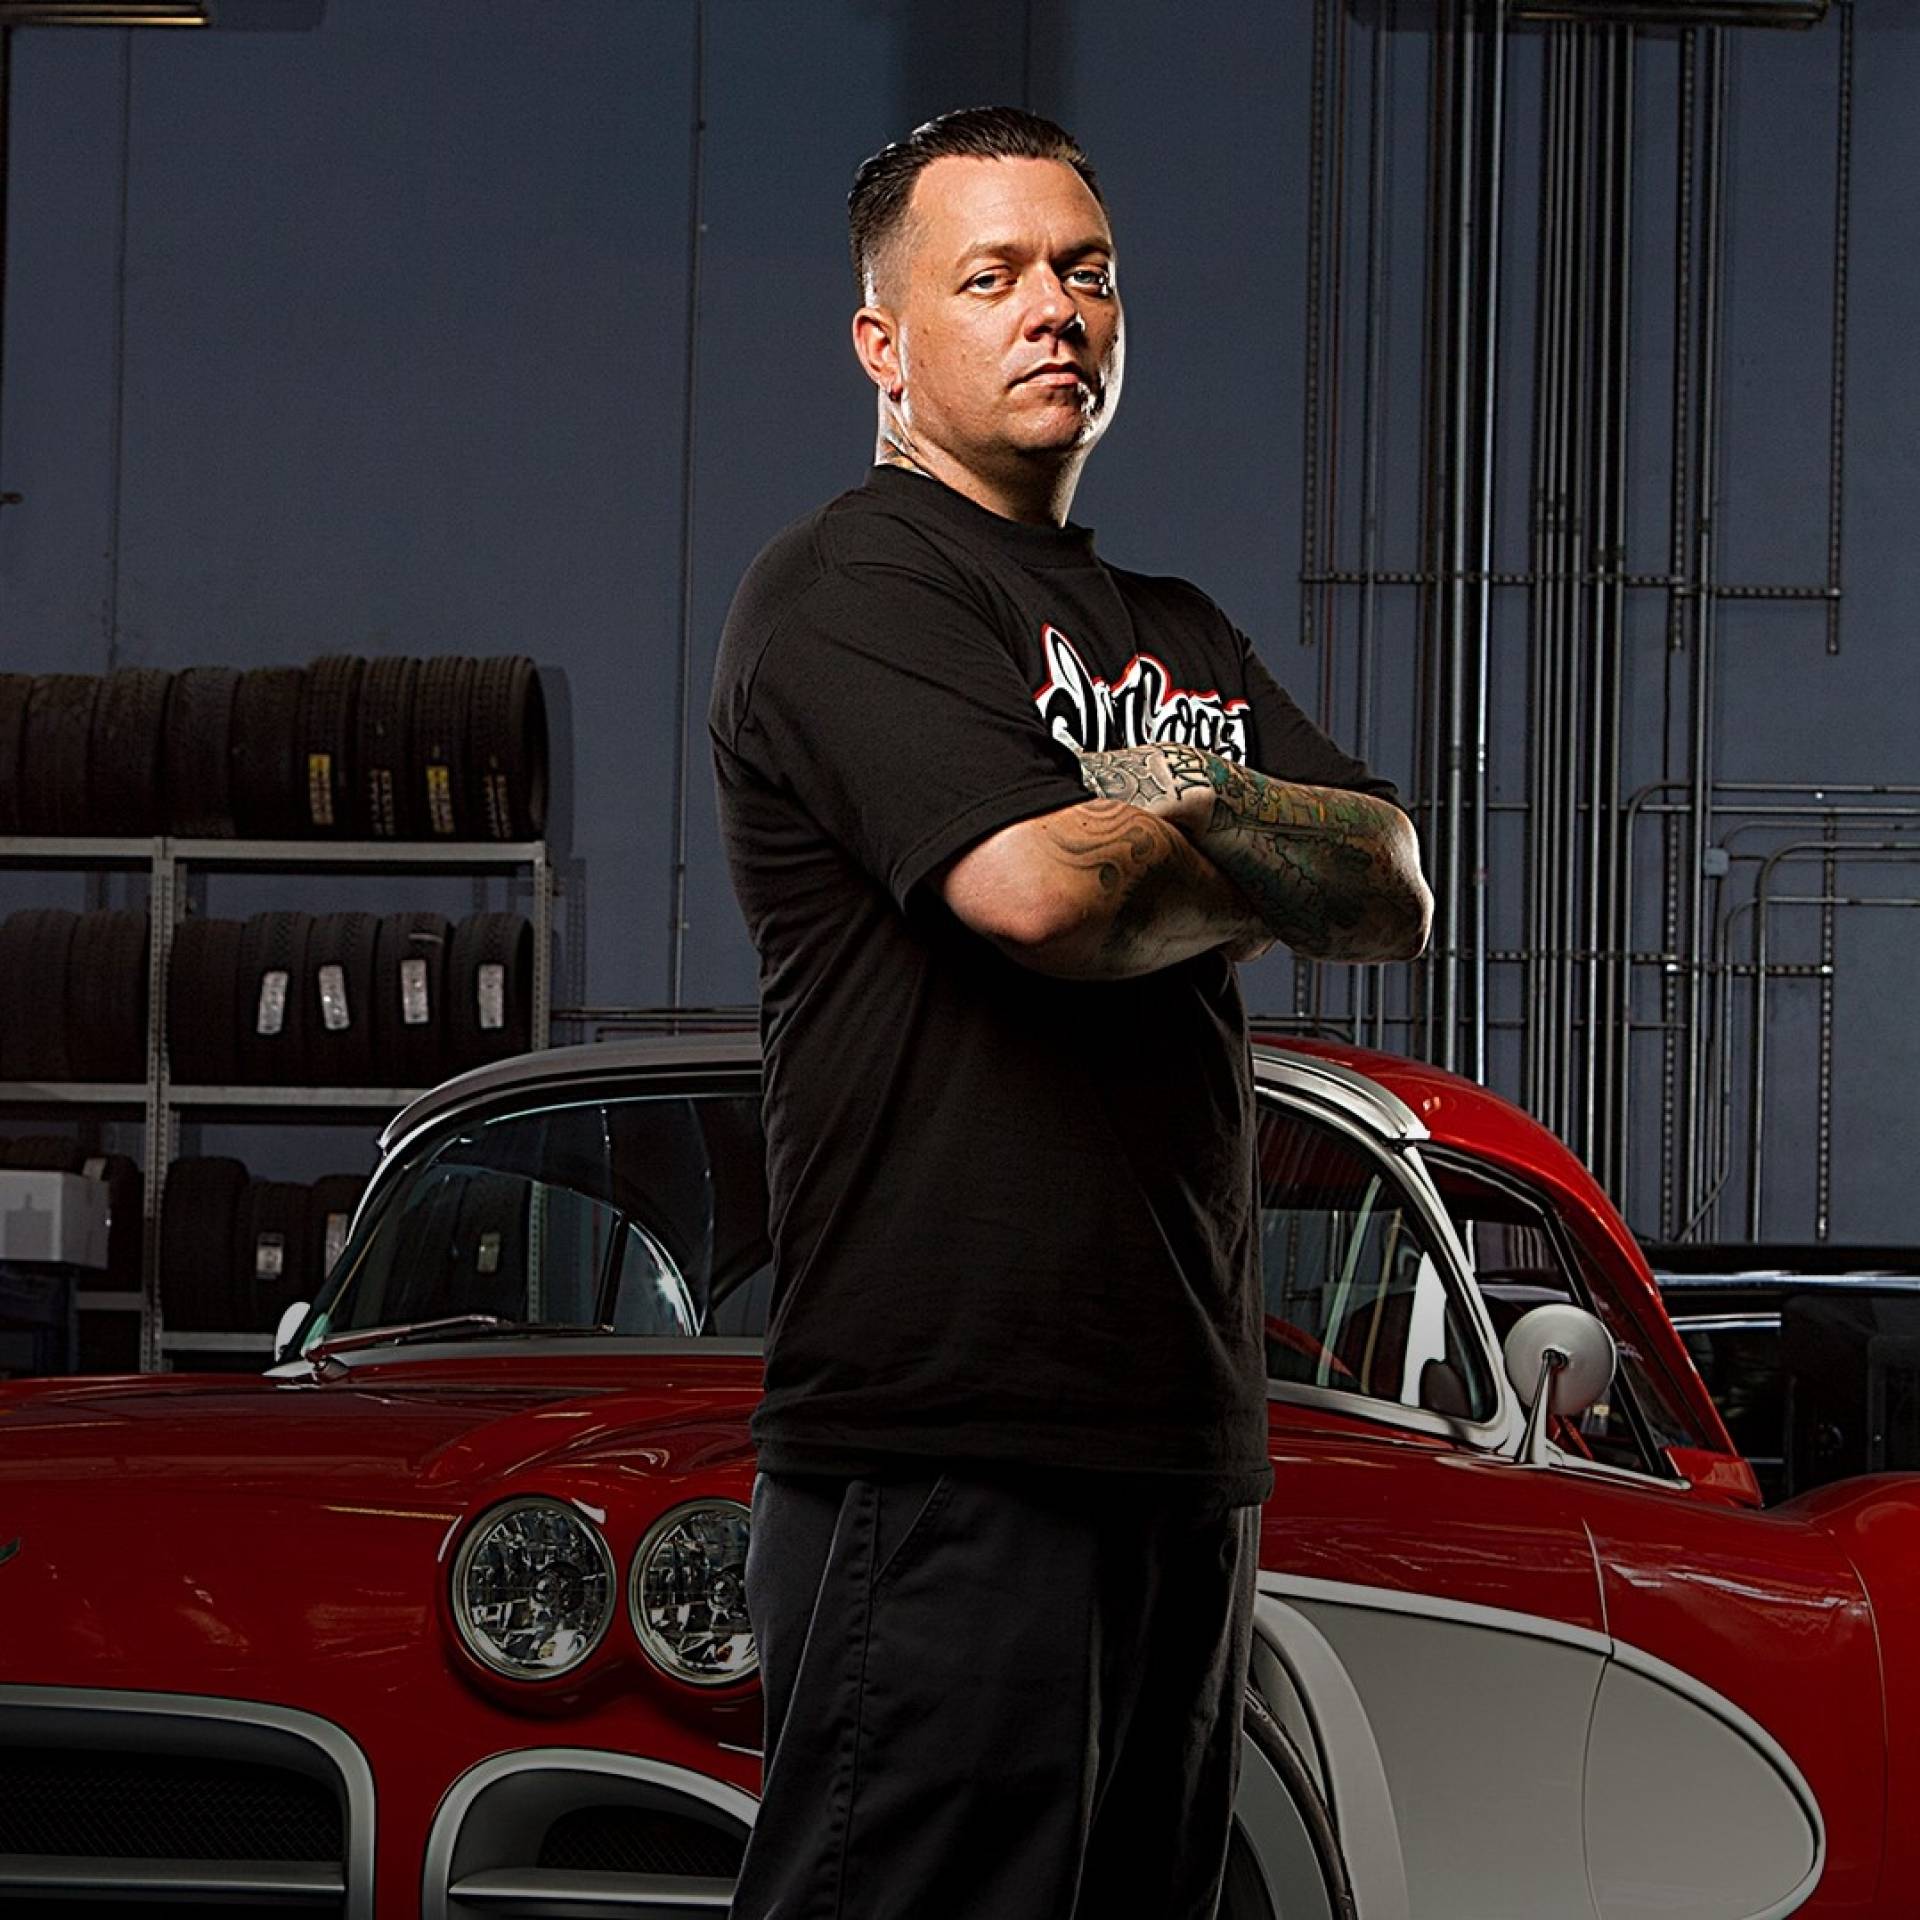 West Coast Customs Shows | discovery+